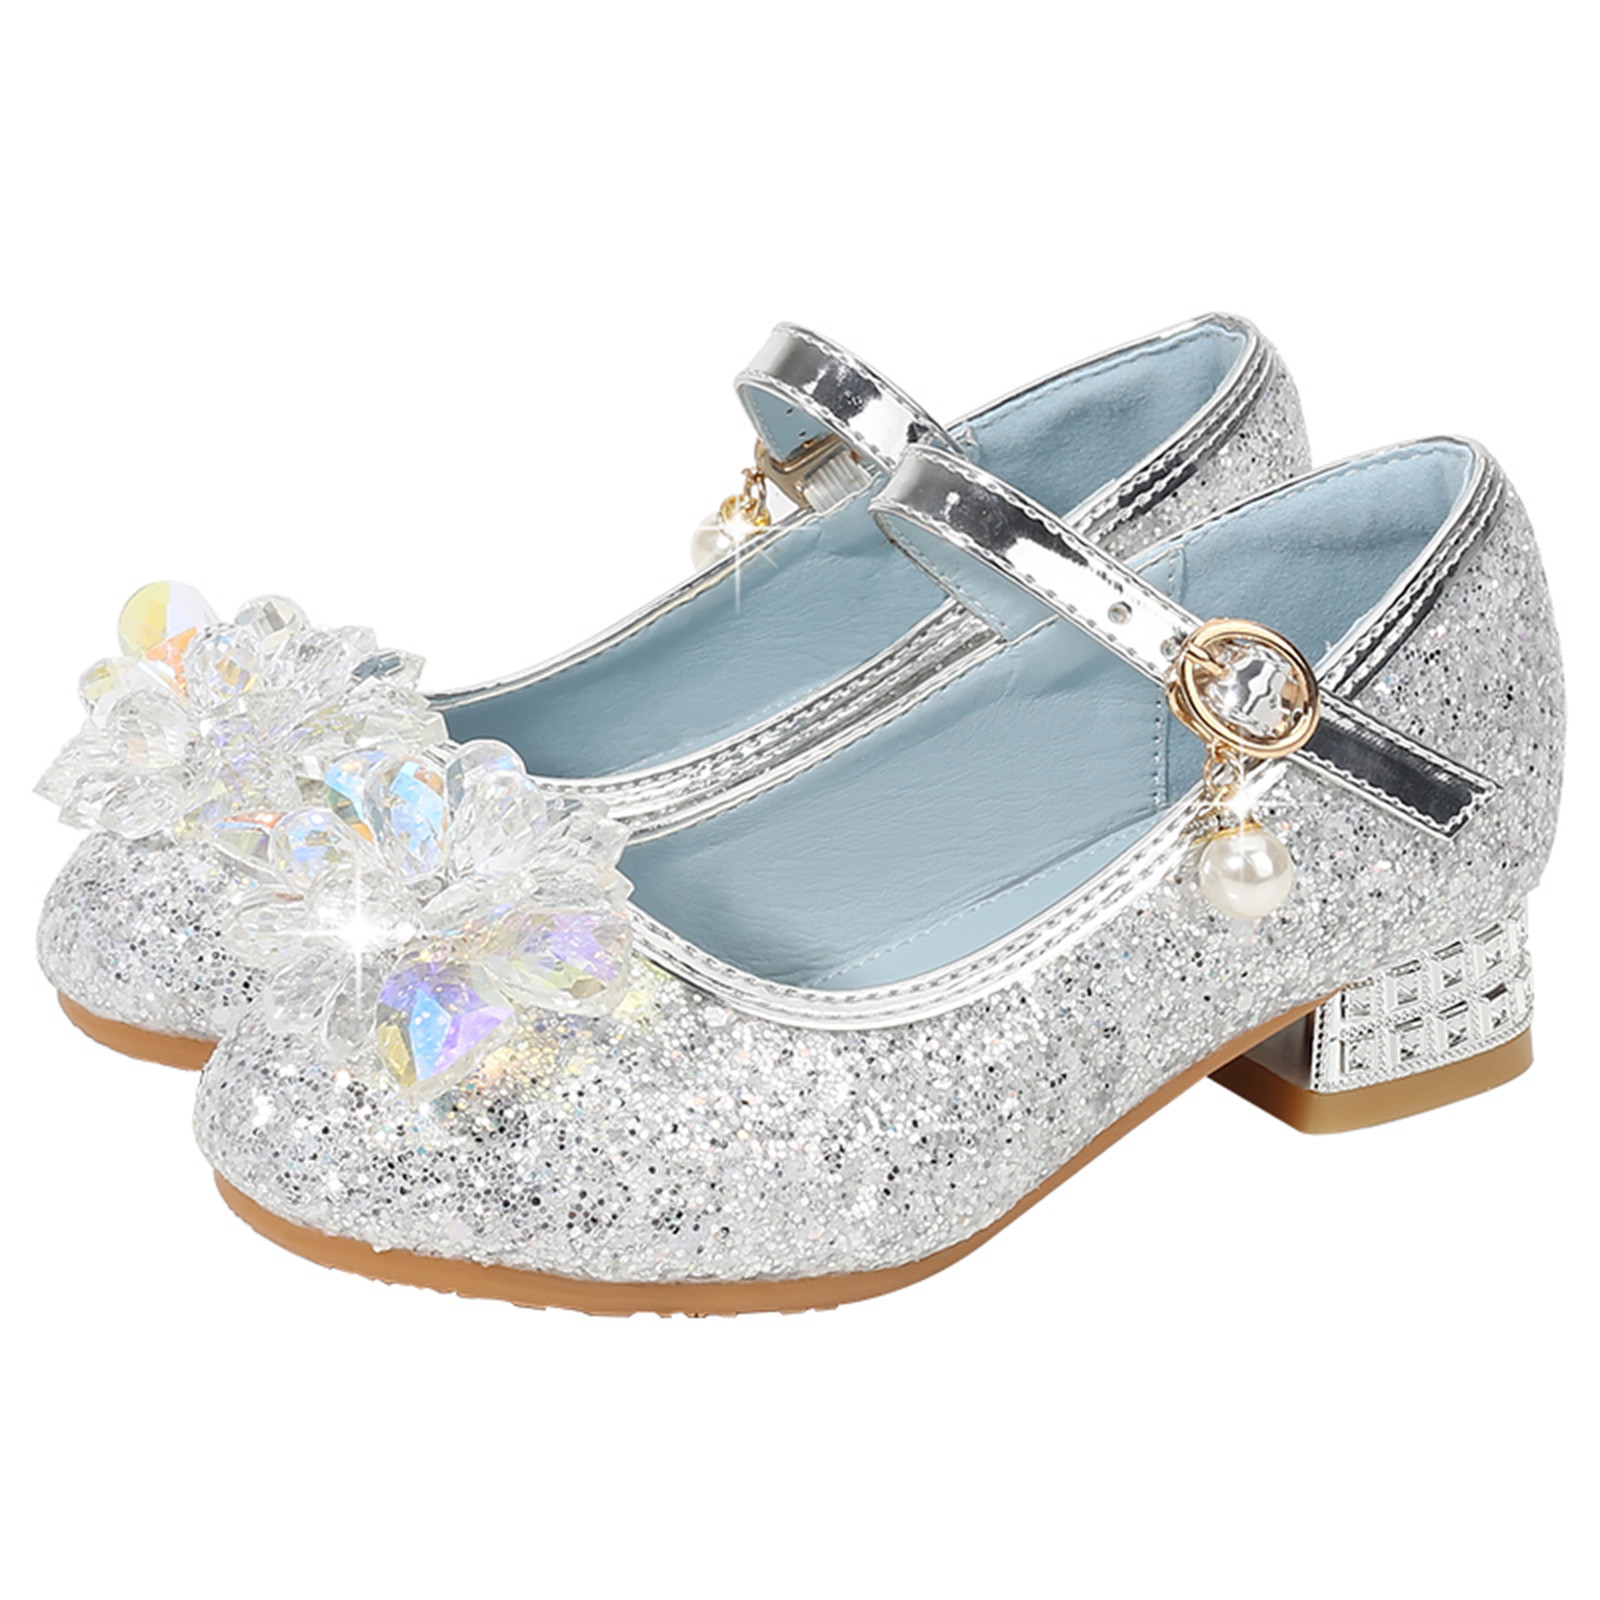 Youmylove Toddler Little Kid Girls Dress Pumps Glitter Sequins Princess Flower Low Heels Party Show Dance Shoes Rhinestone Sandals Children Casual Shoes - image 3 of 9